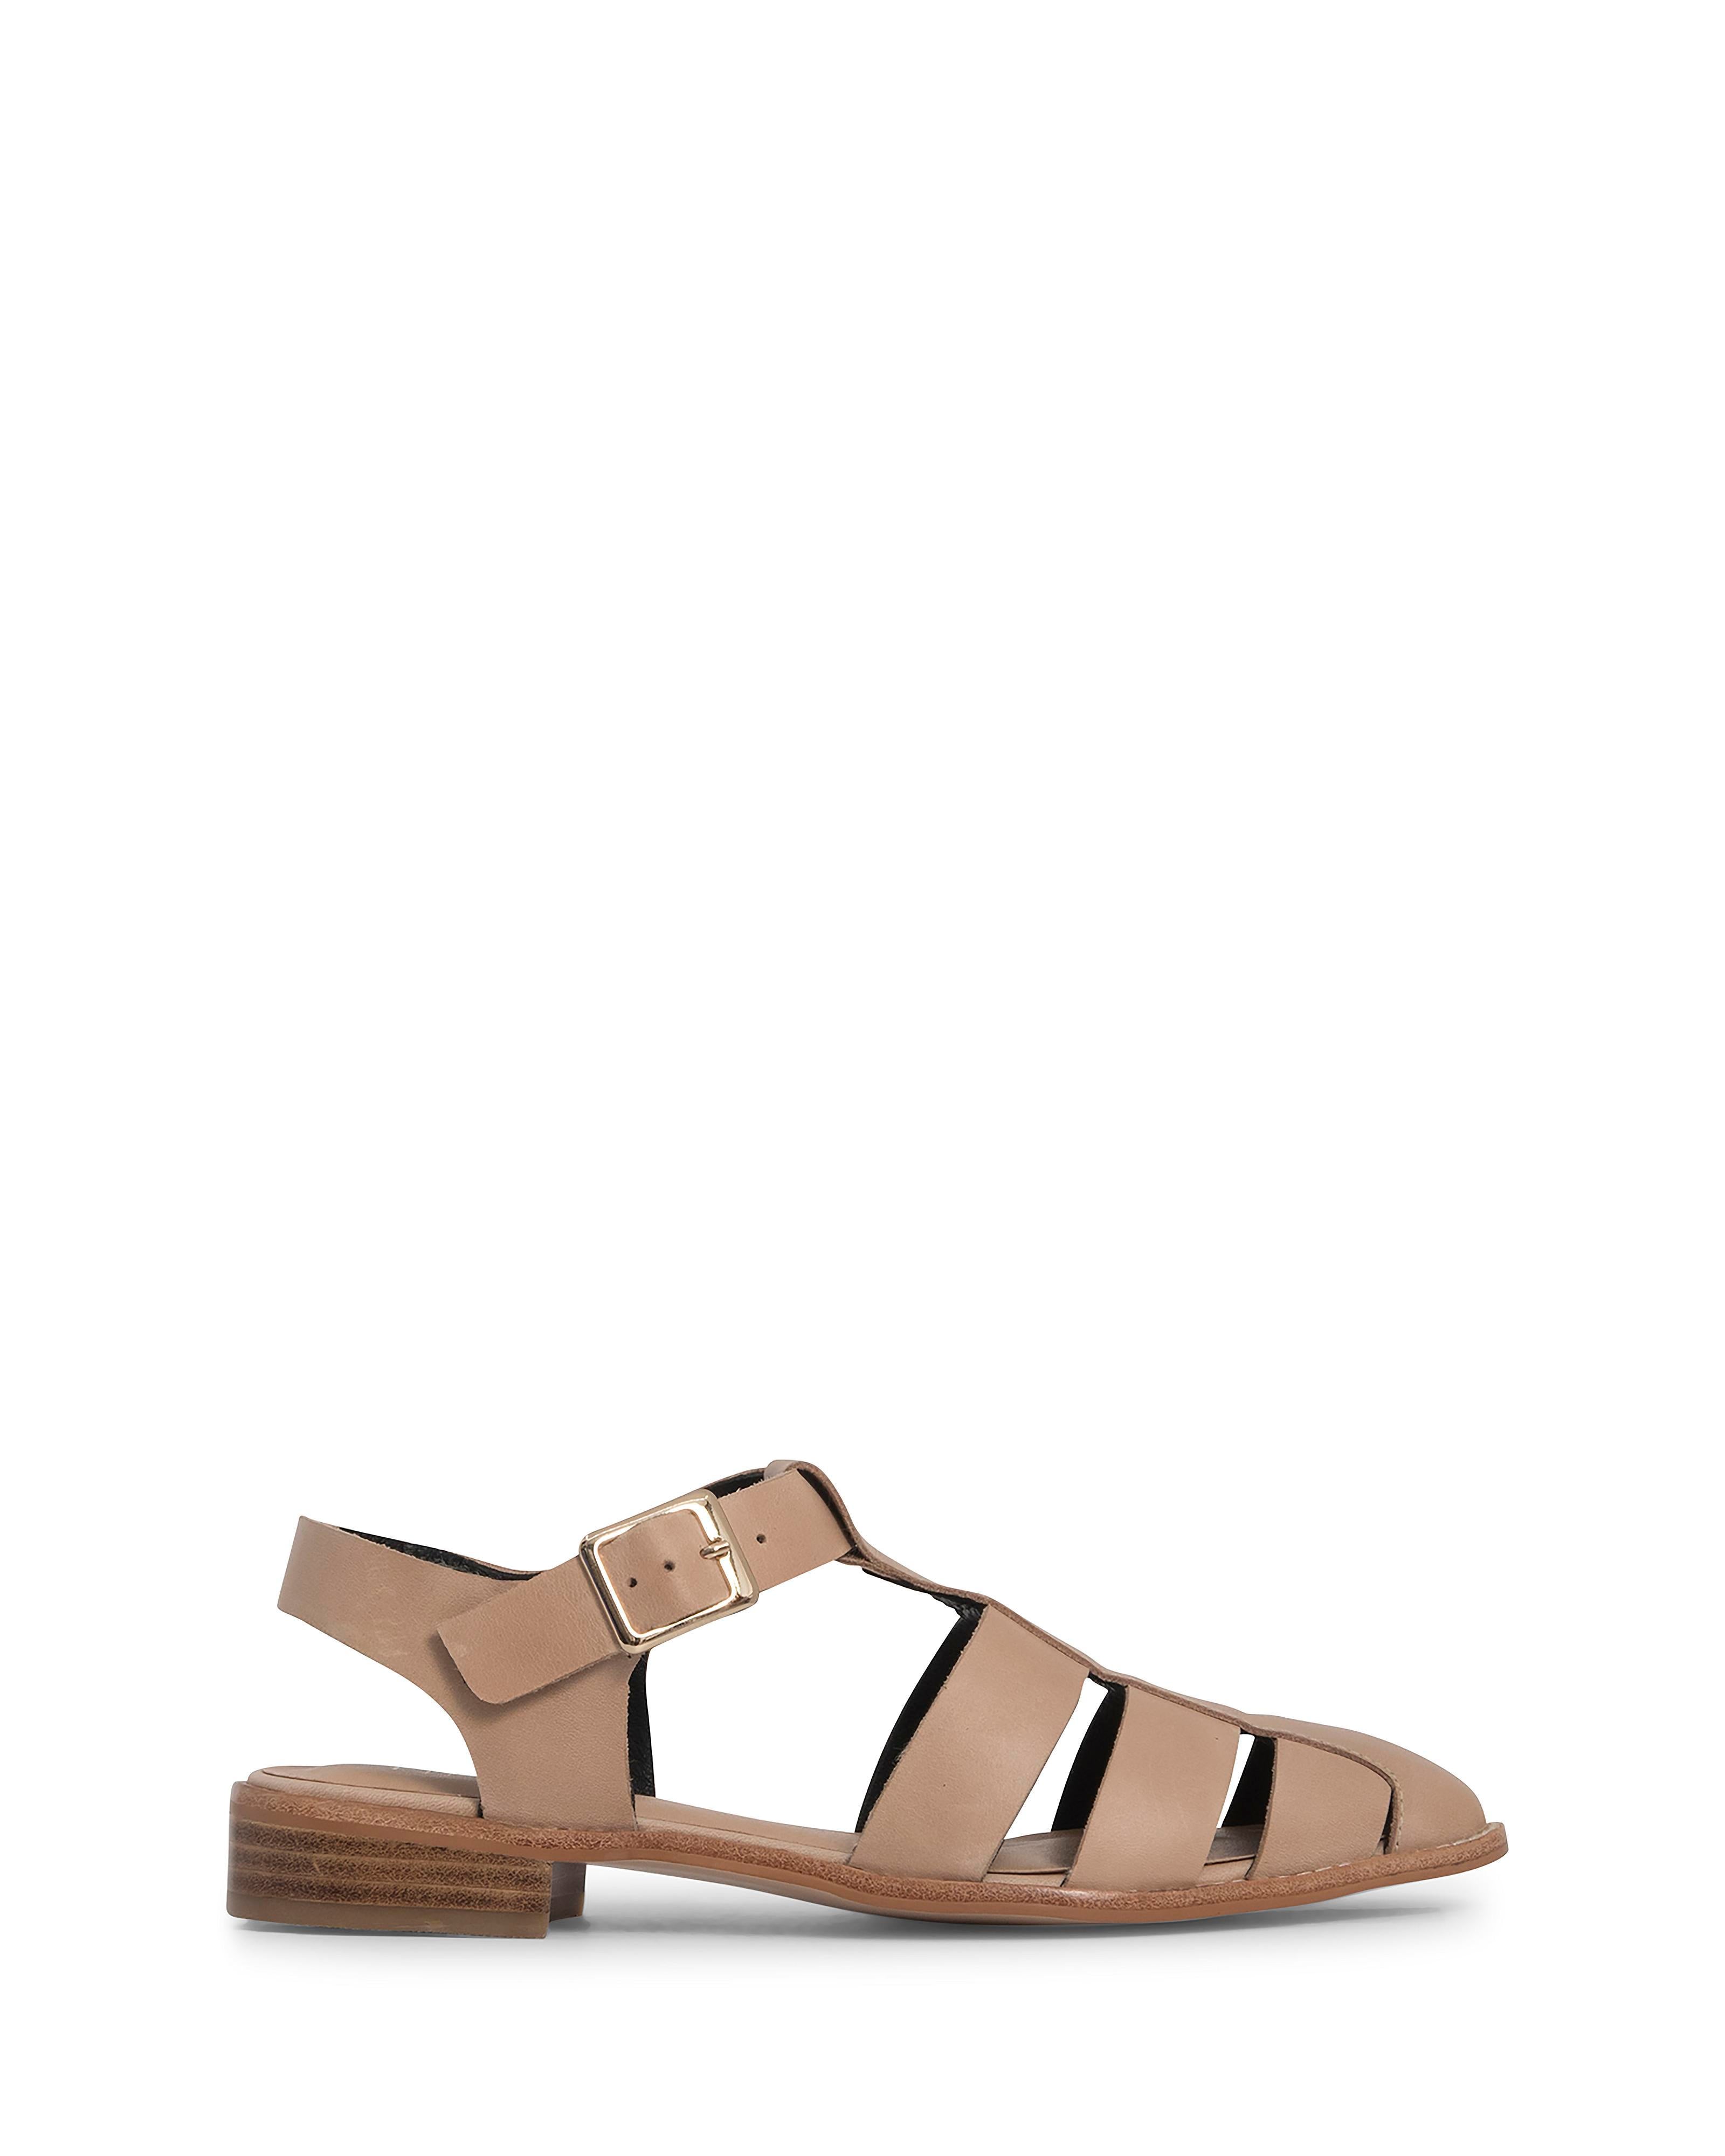 Brinley Natural 3cm Sandal with Almond Toe and Adjustable Ankle Strap 